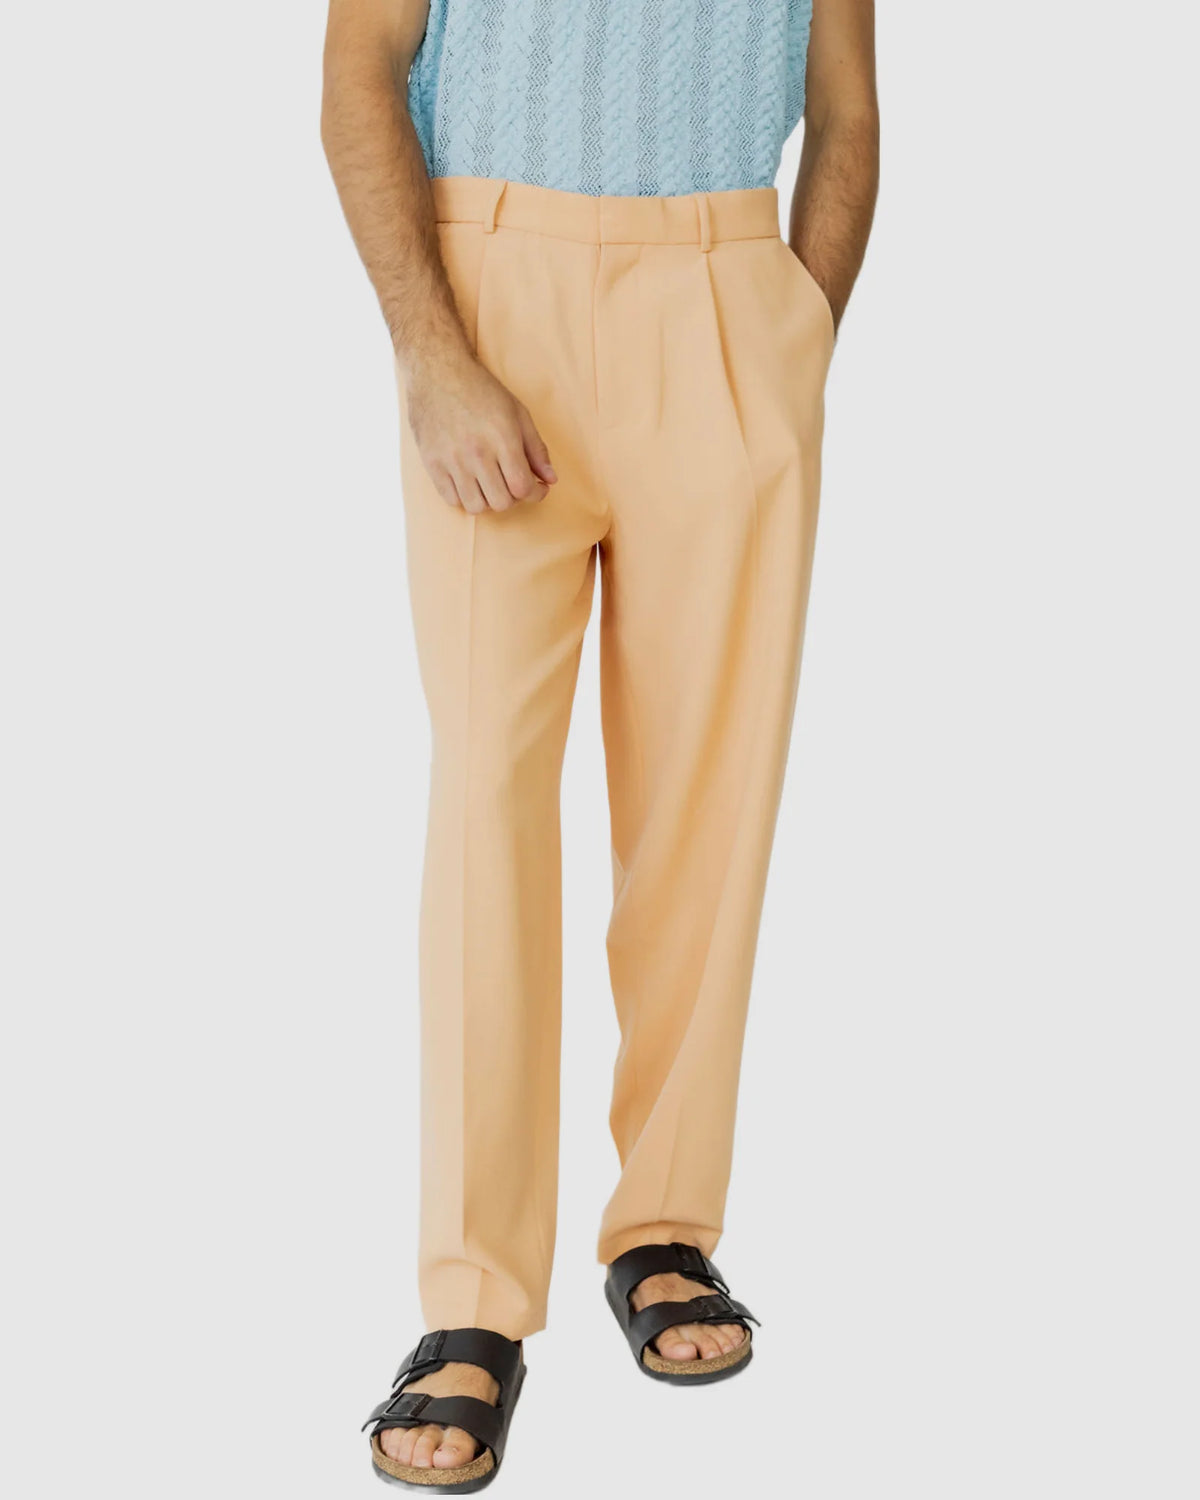 Justin Cassin Heran Loose Fit Trousers in Apricot Color